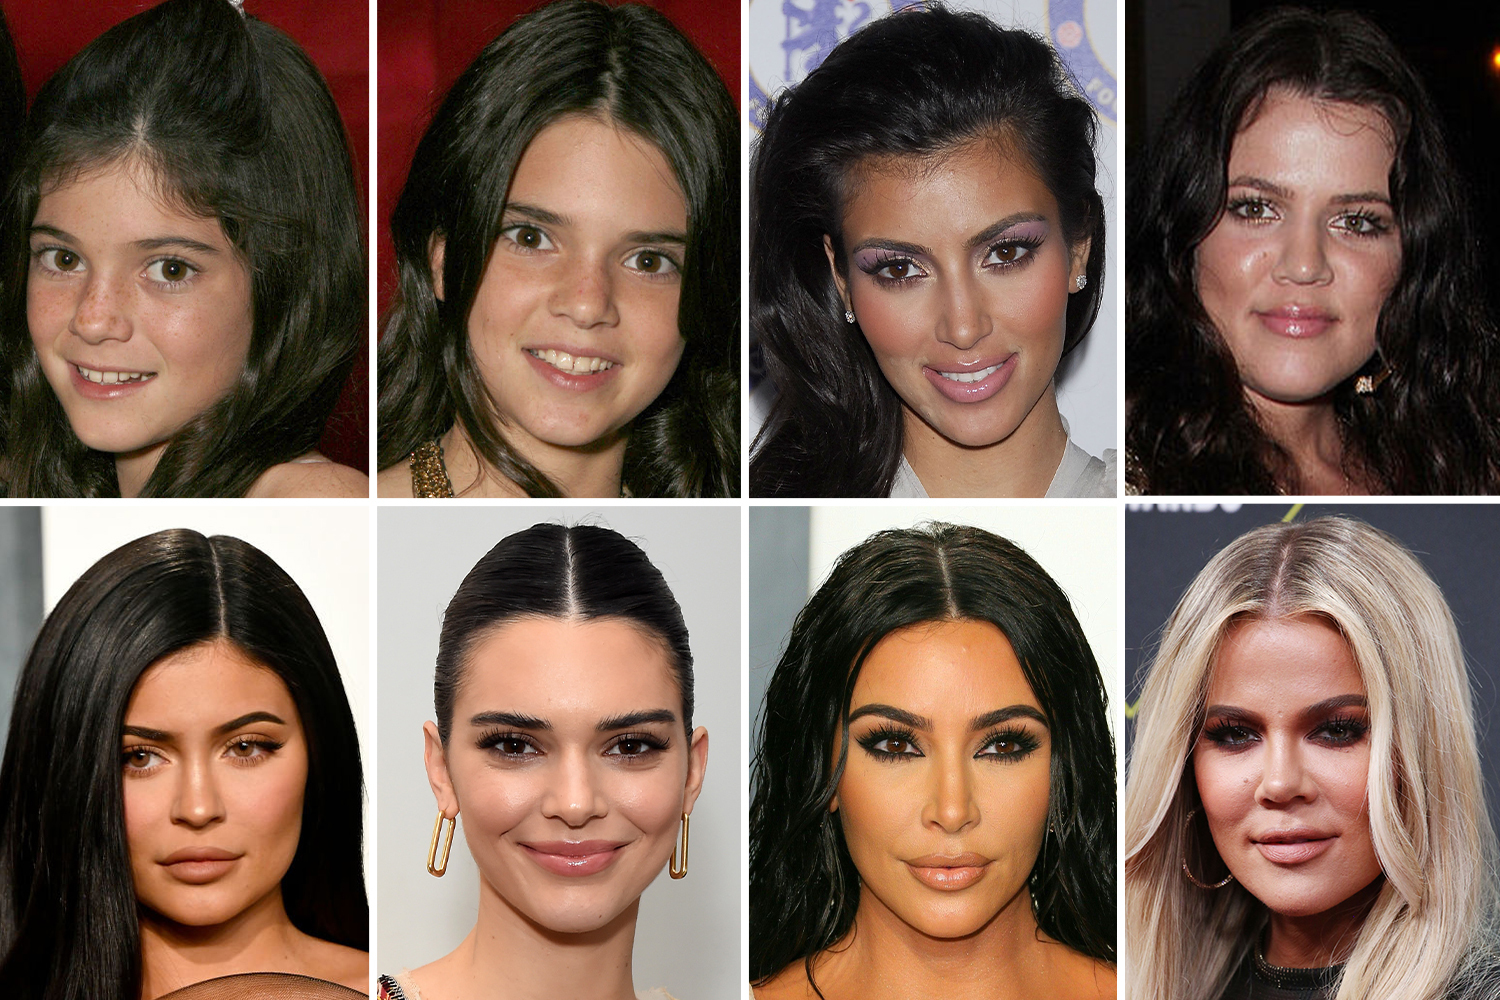 KardashianJenner's before and after how the KUWTK stars have changed through the years from